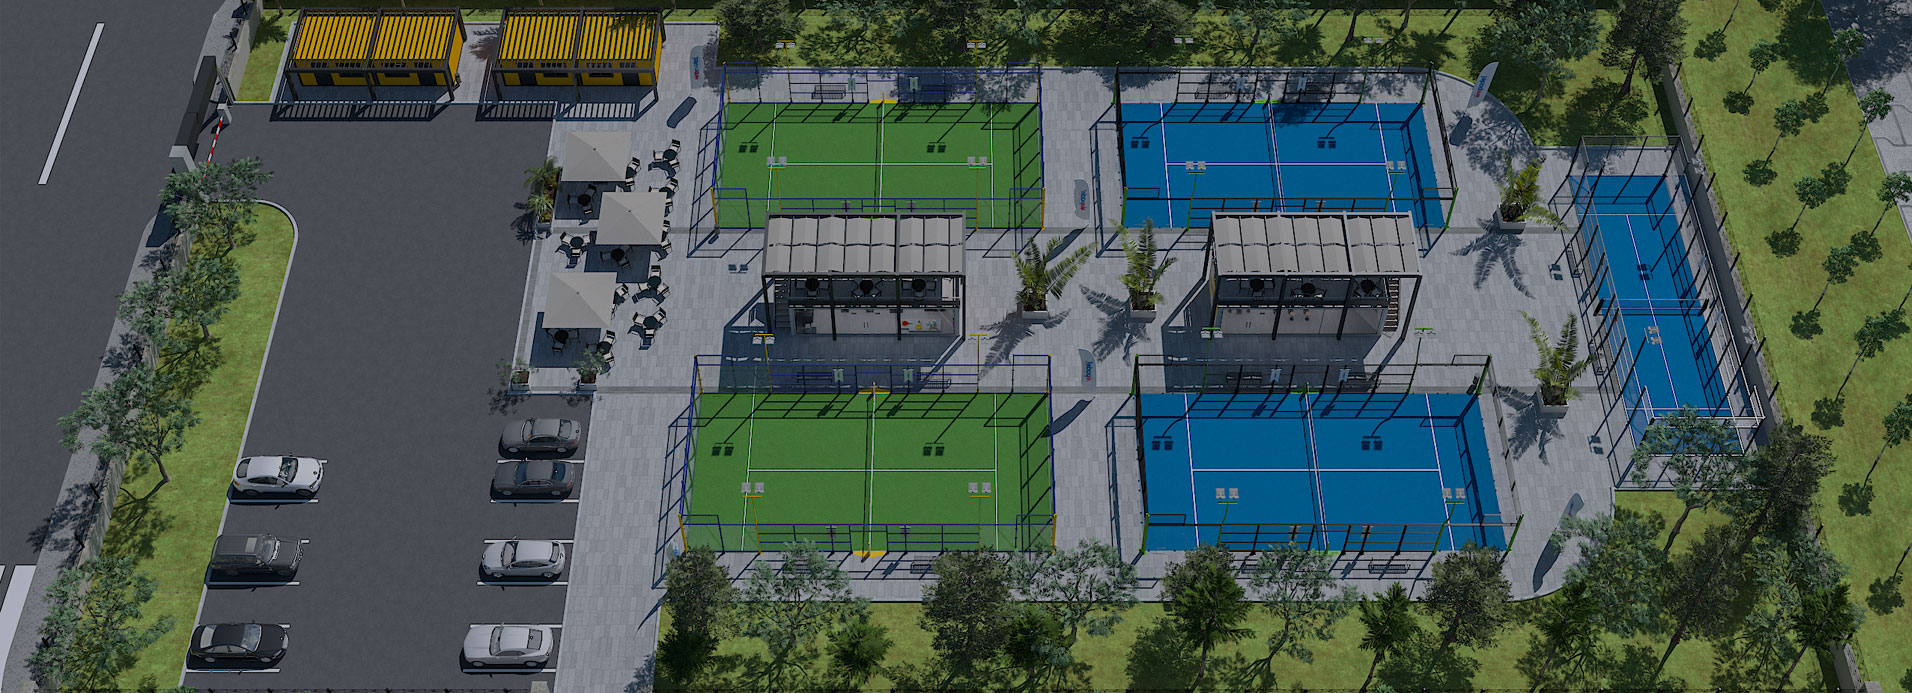 padel-club-overview